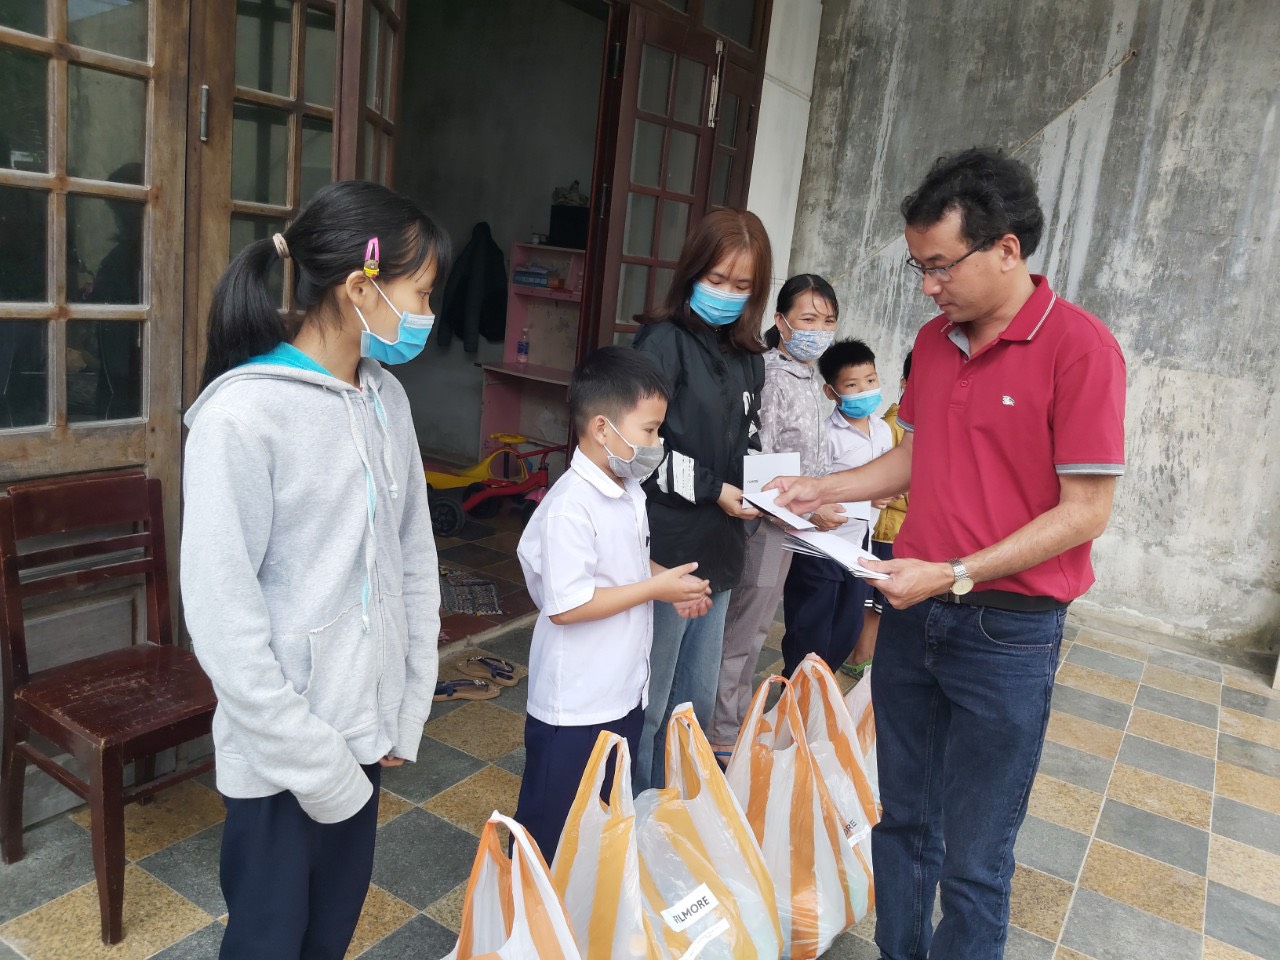 Filmore shared a “Happy, Wealthy Tet” with people in the Central region